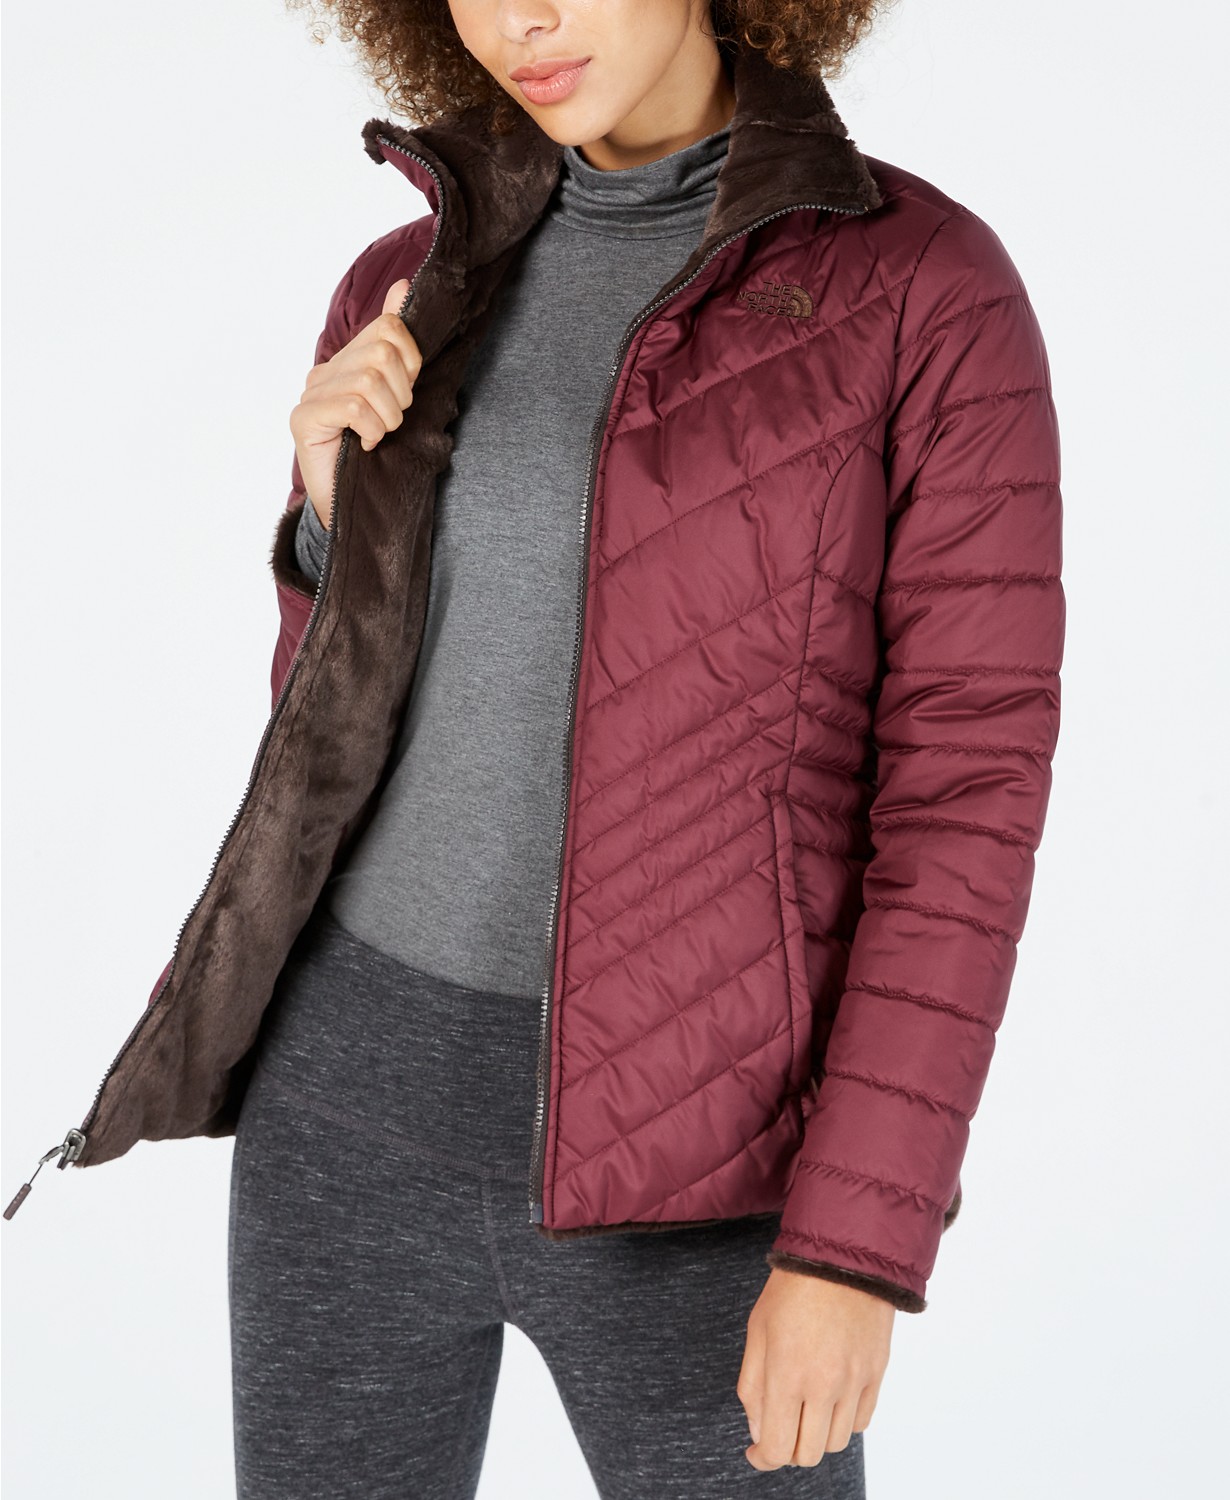 macy north face sale Online Shopping 